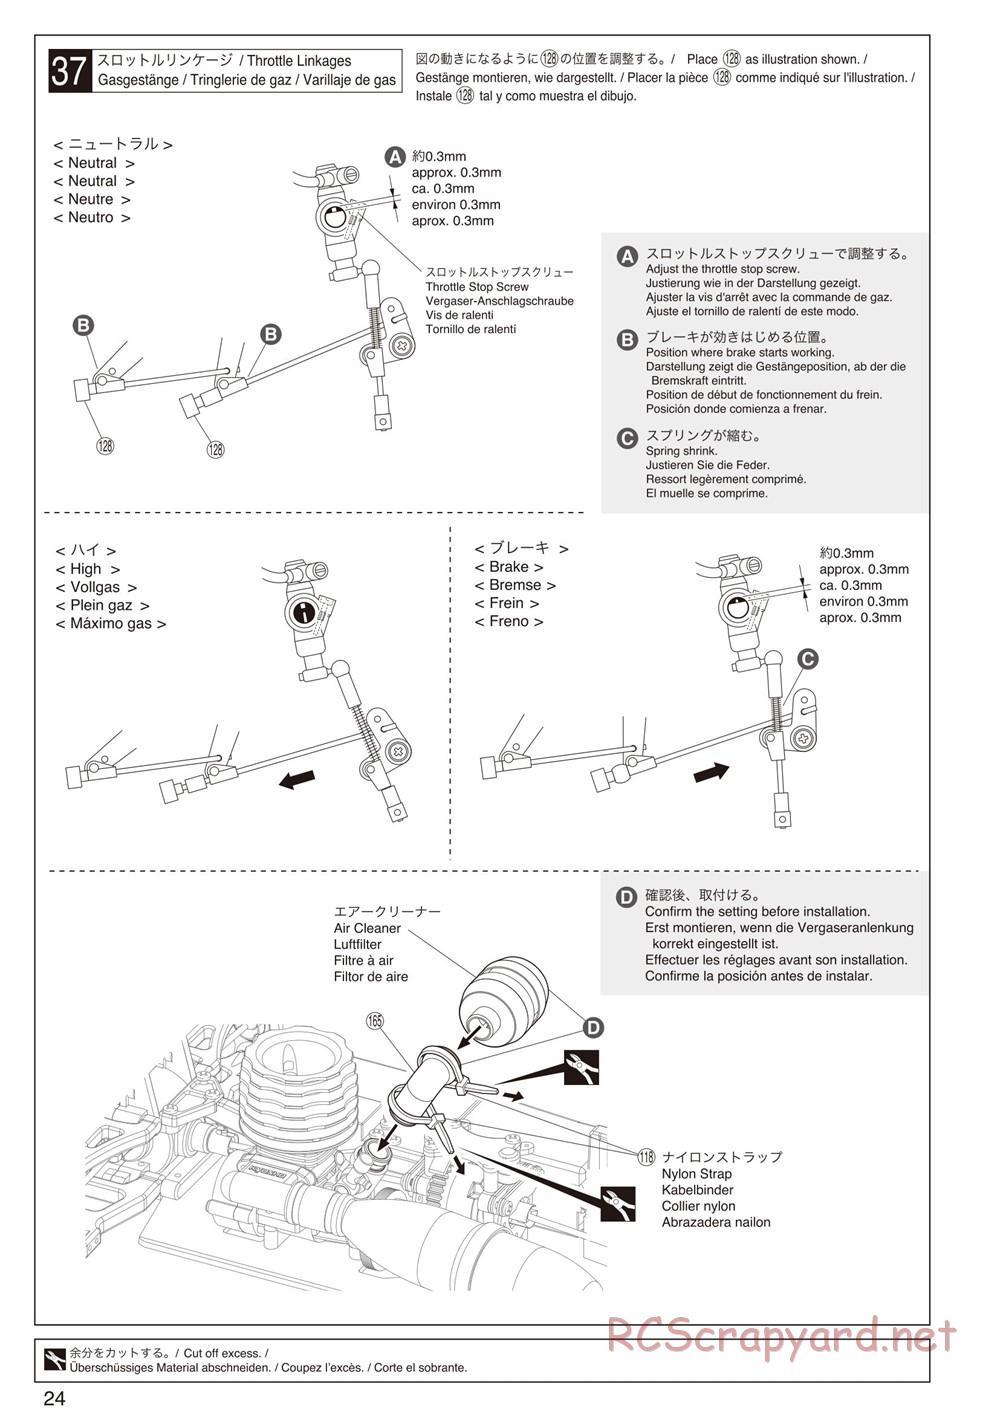 Kyosho - DRX - Manual - Page 24